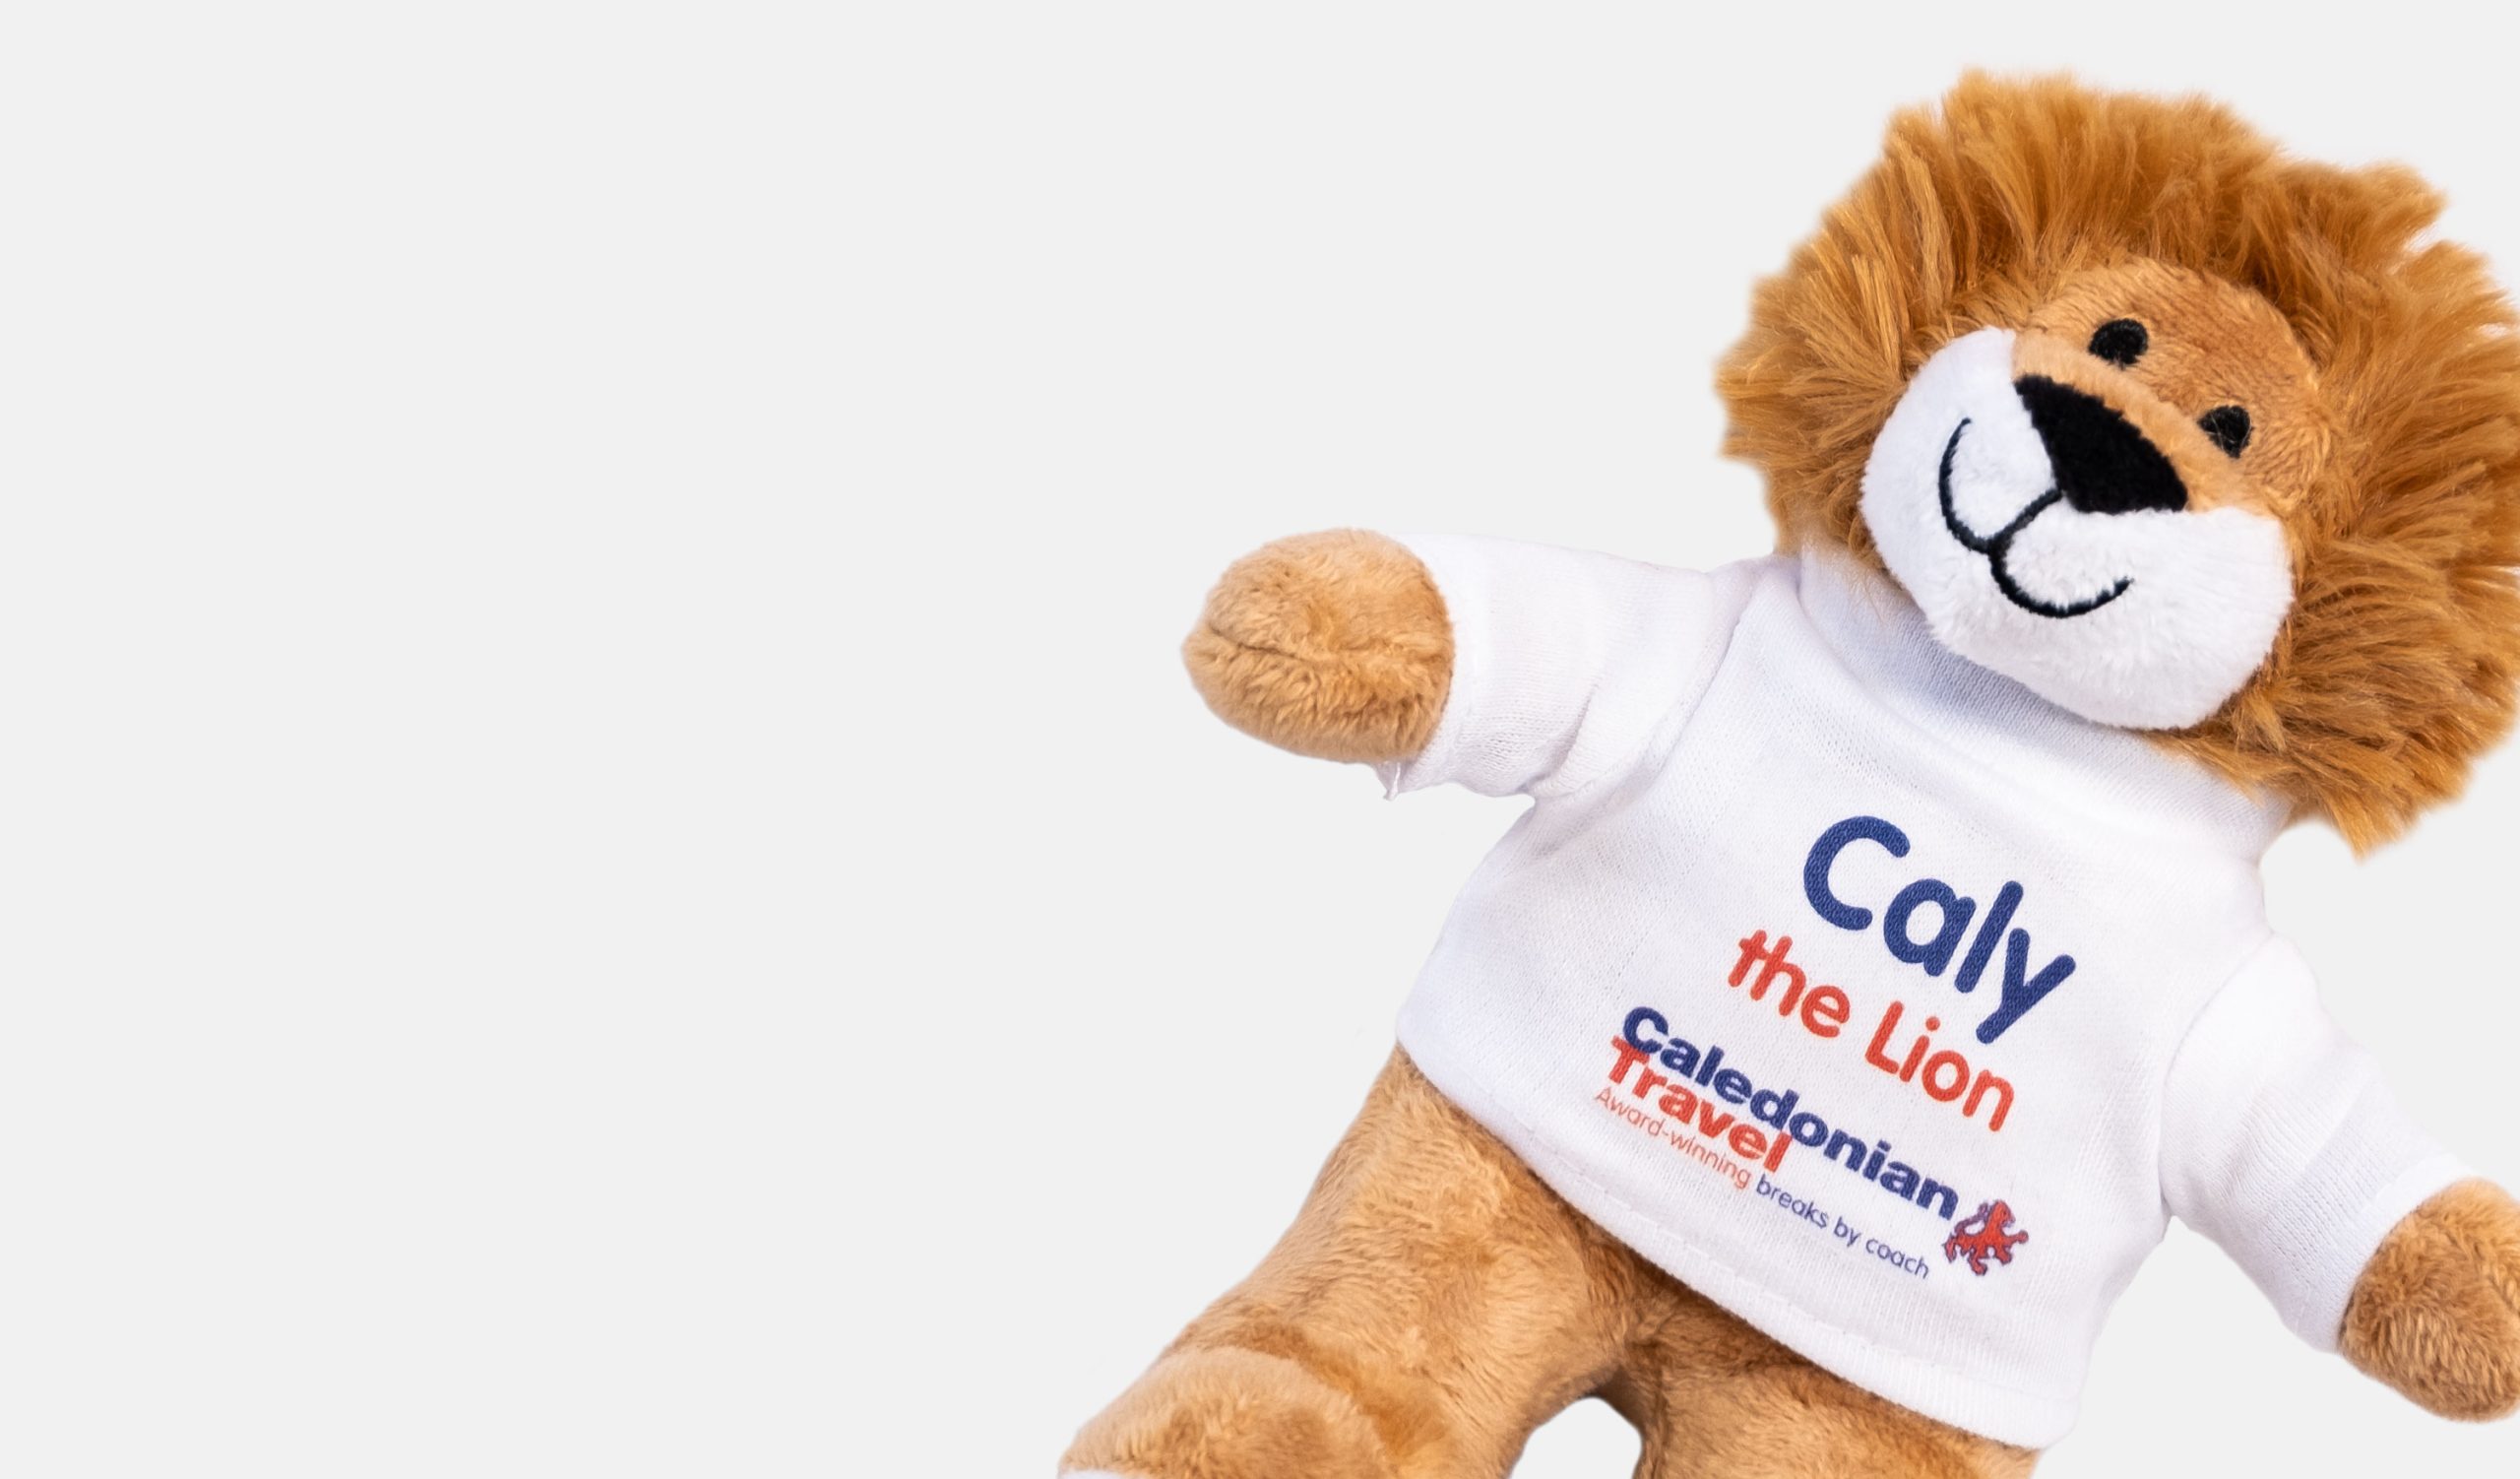 caledonian travel caly the lion teddy